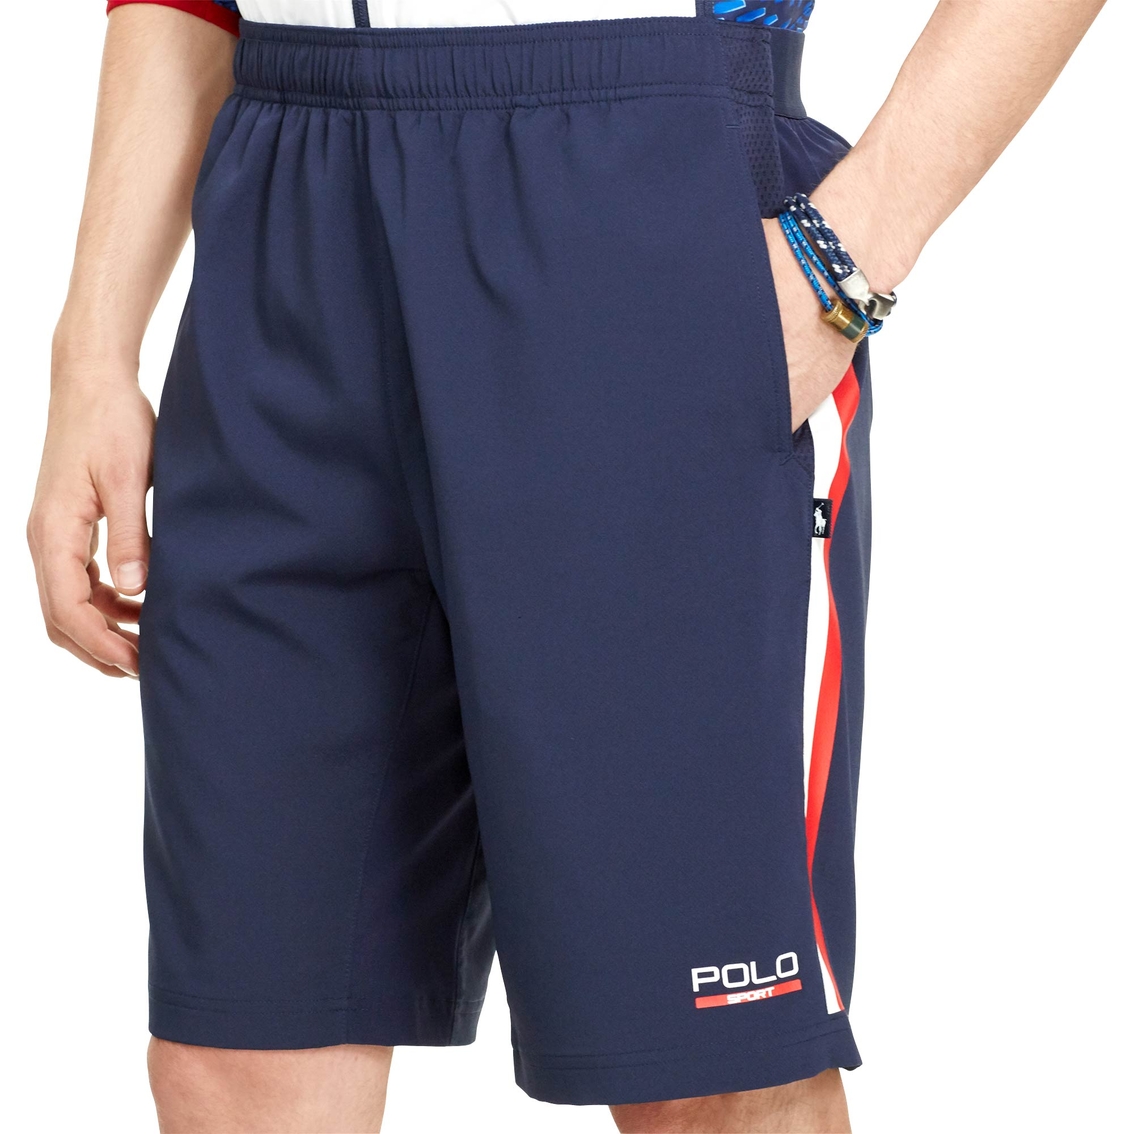 Polo Sport 10 in. All Sport Shorts - Image 2 of 3